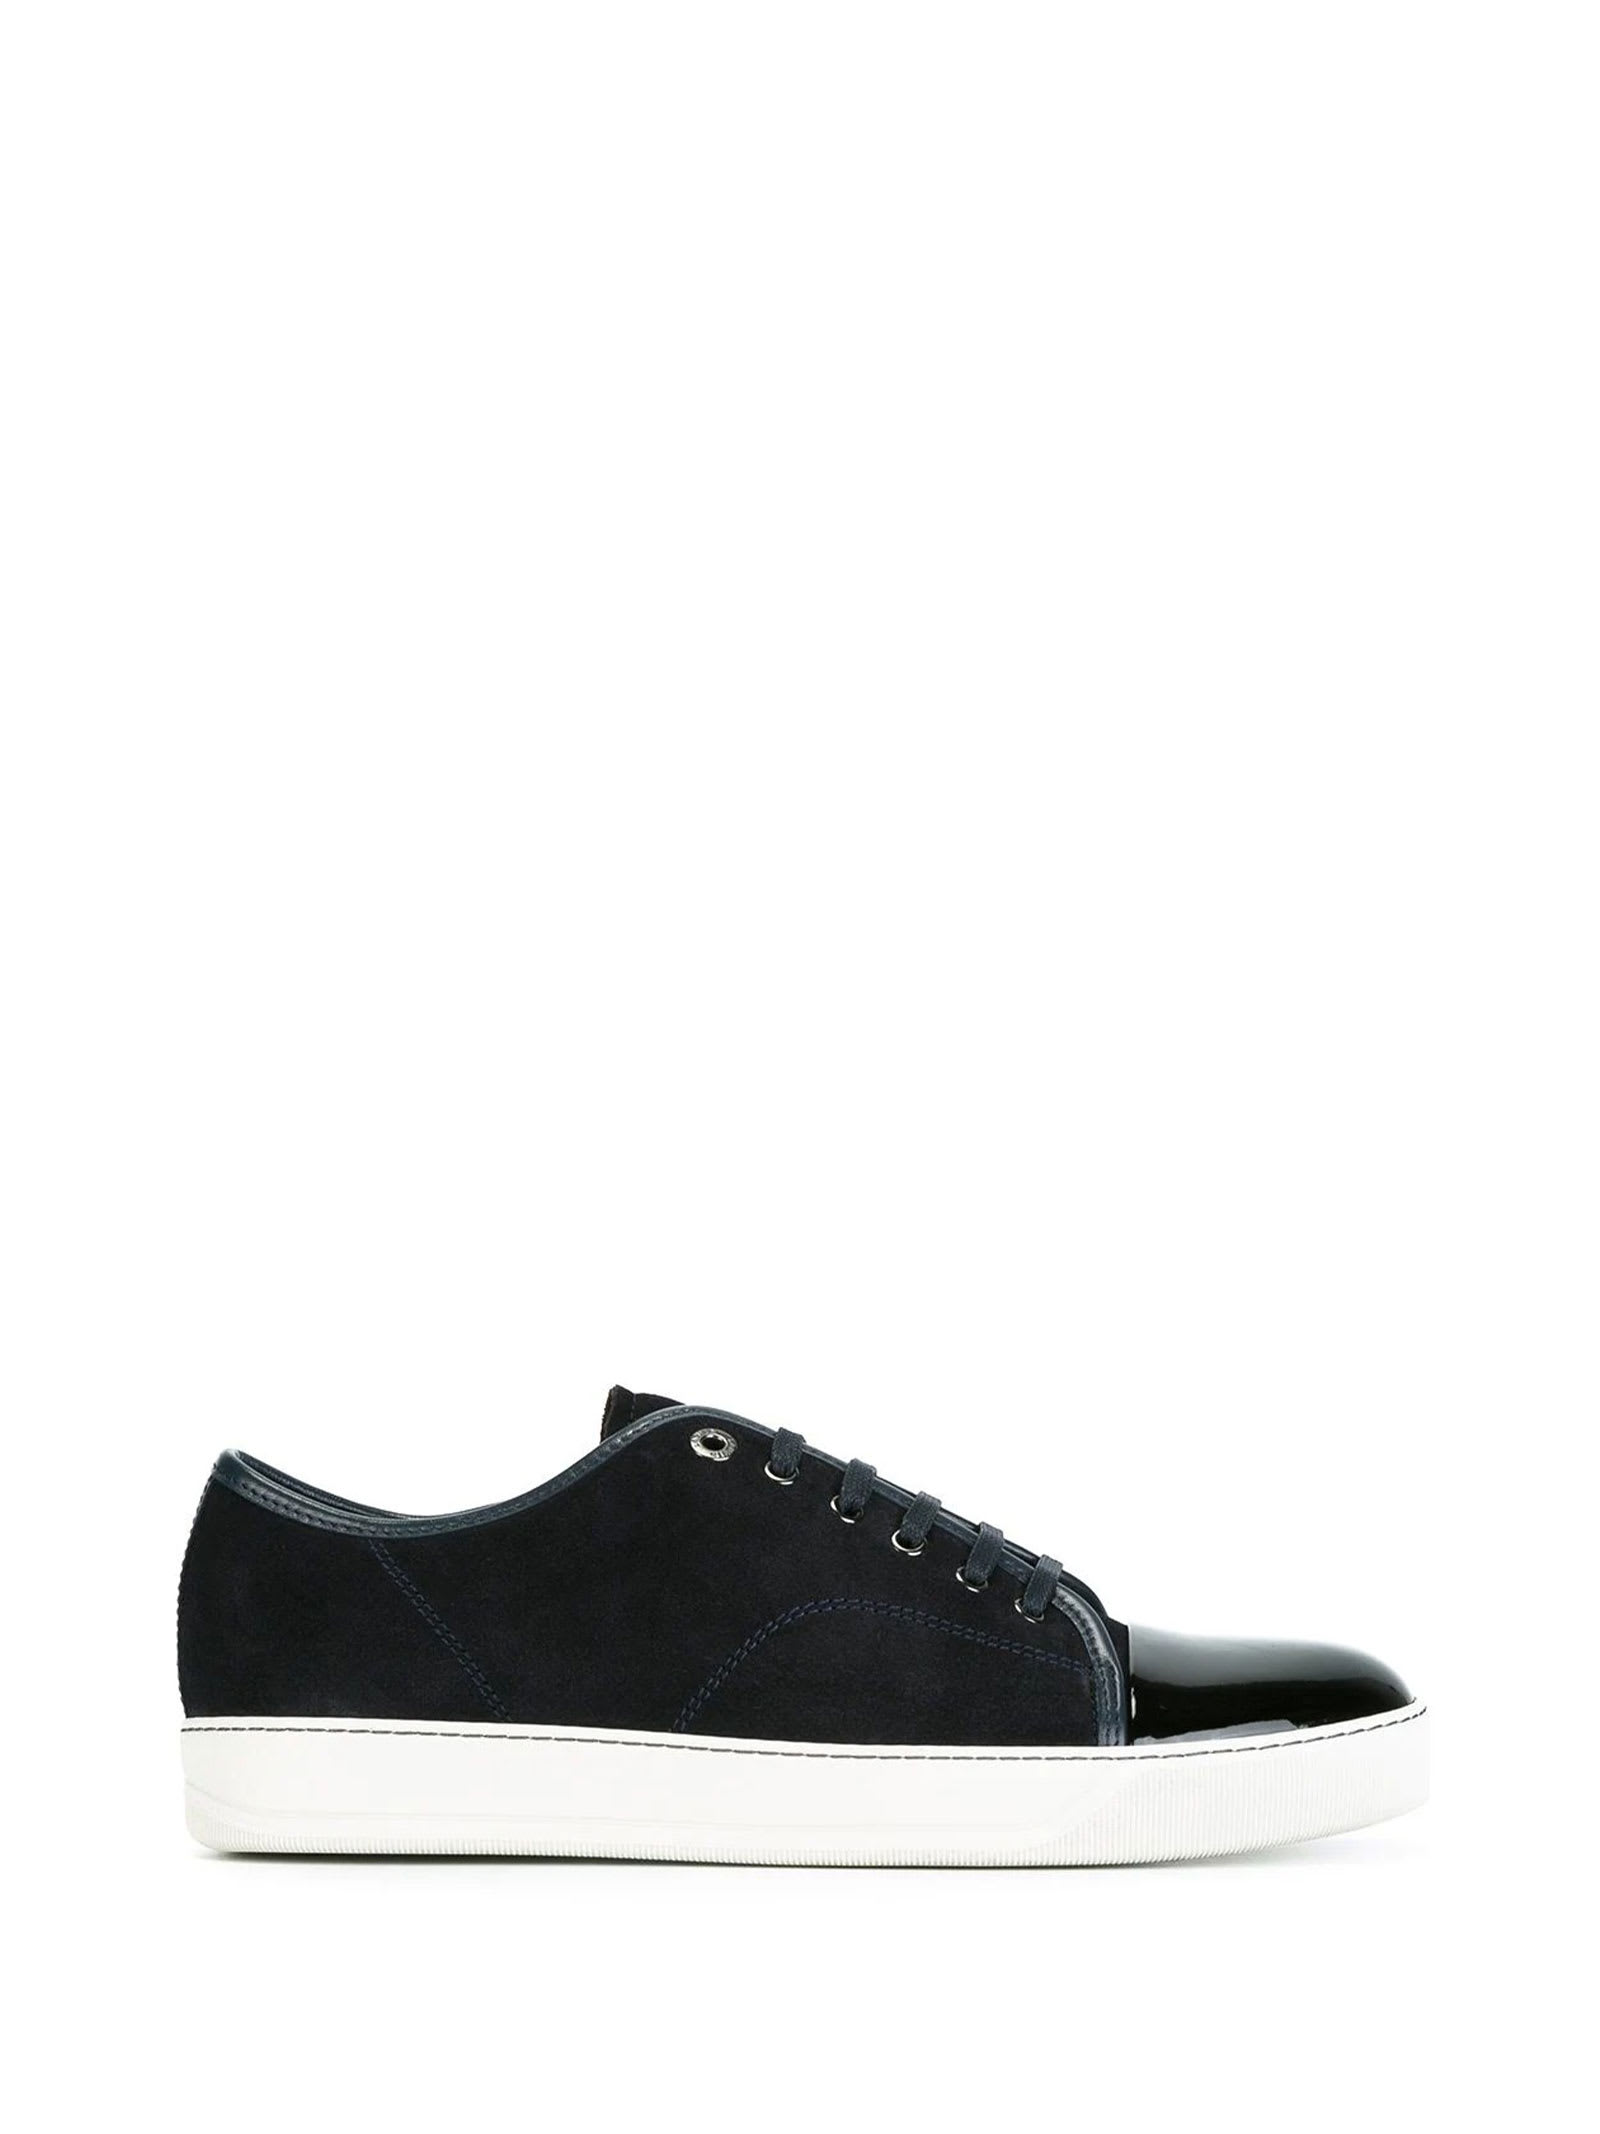 Lanvin Sneakers With Contrasting Toe